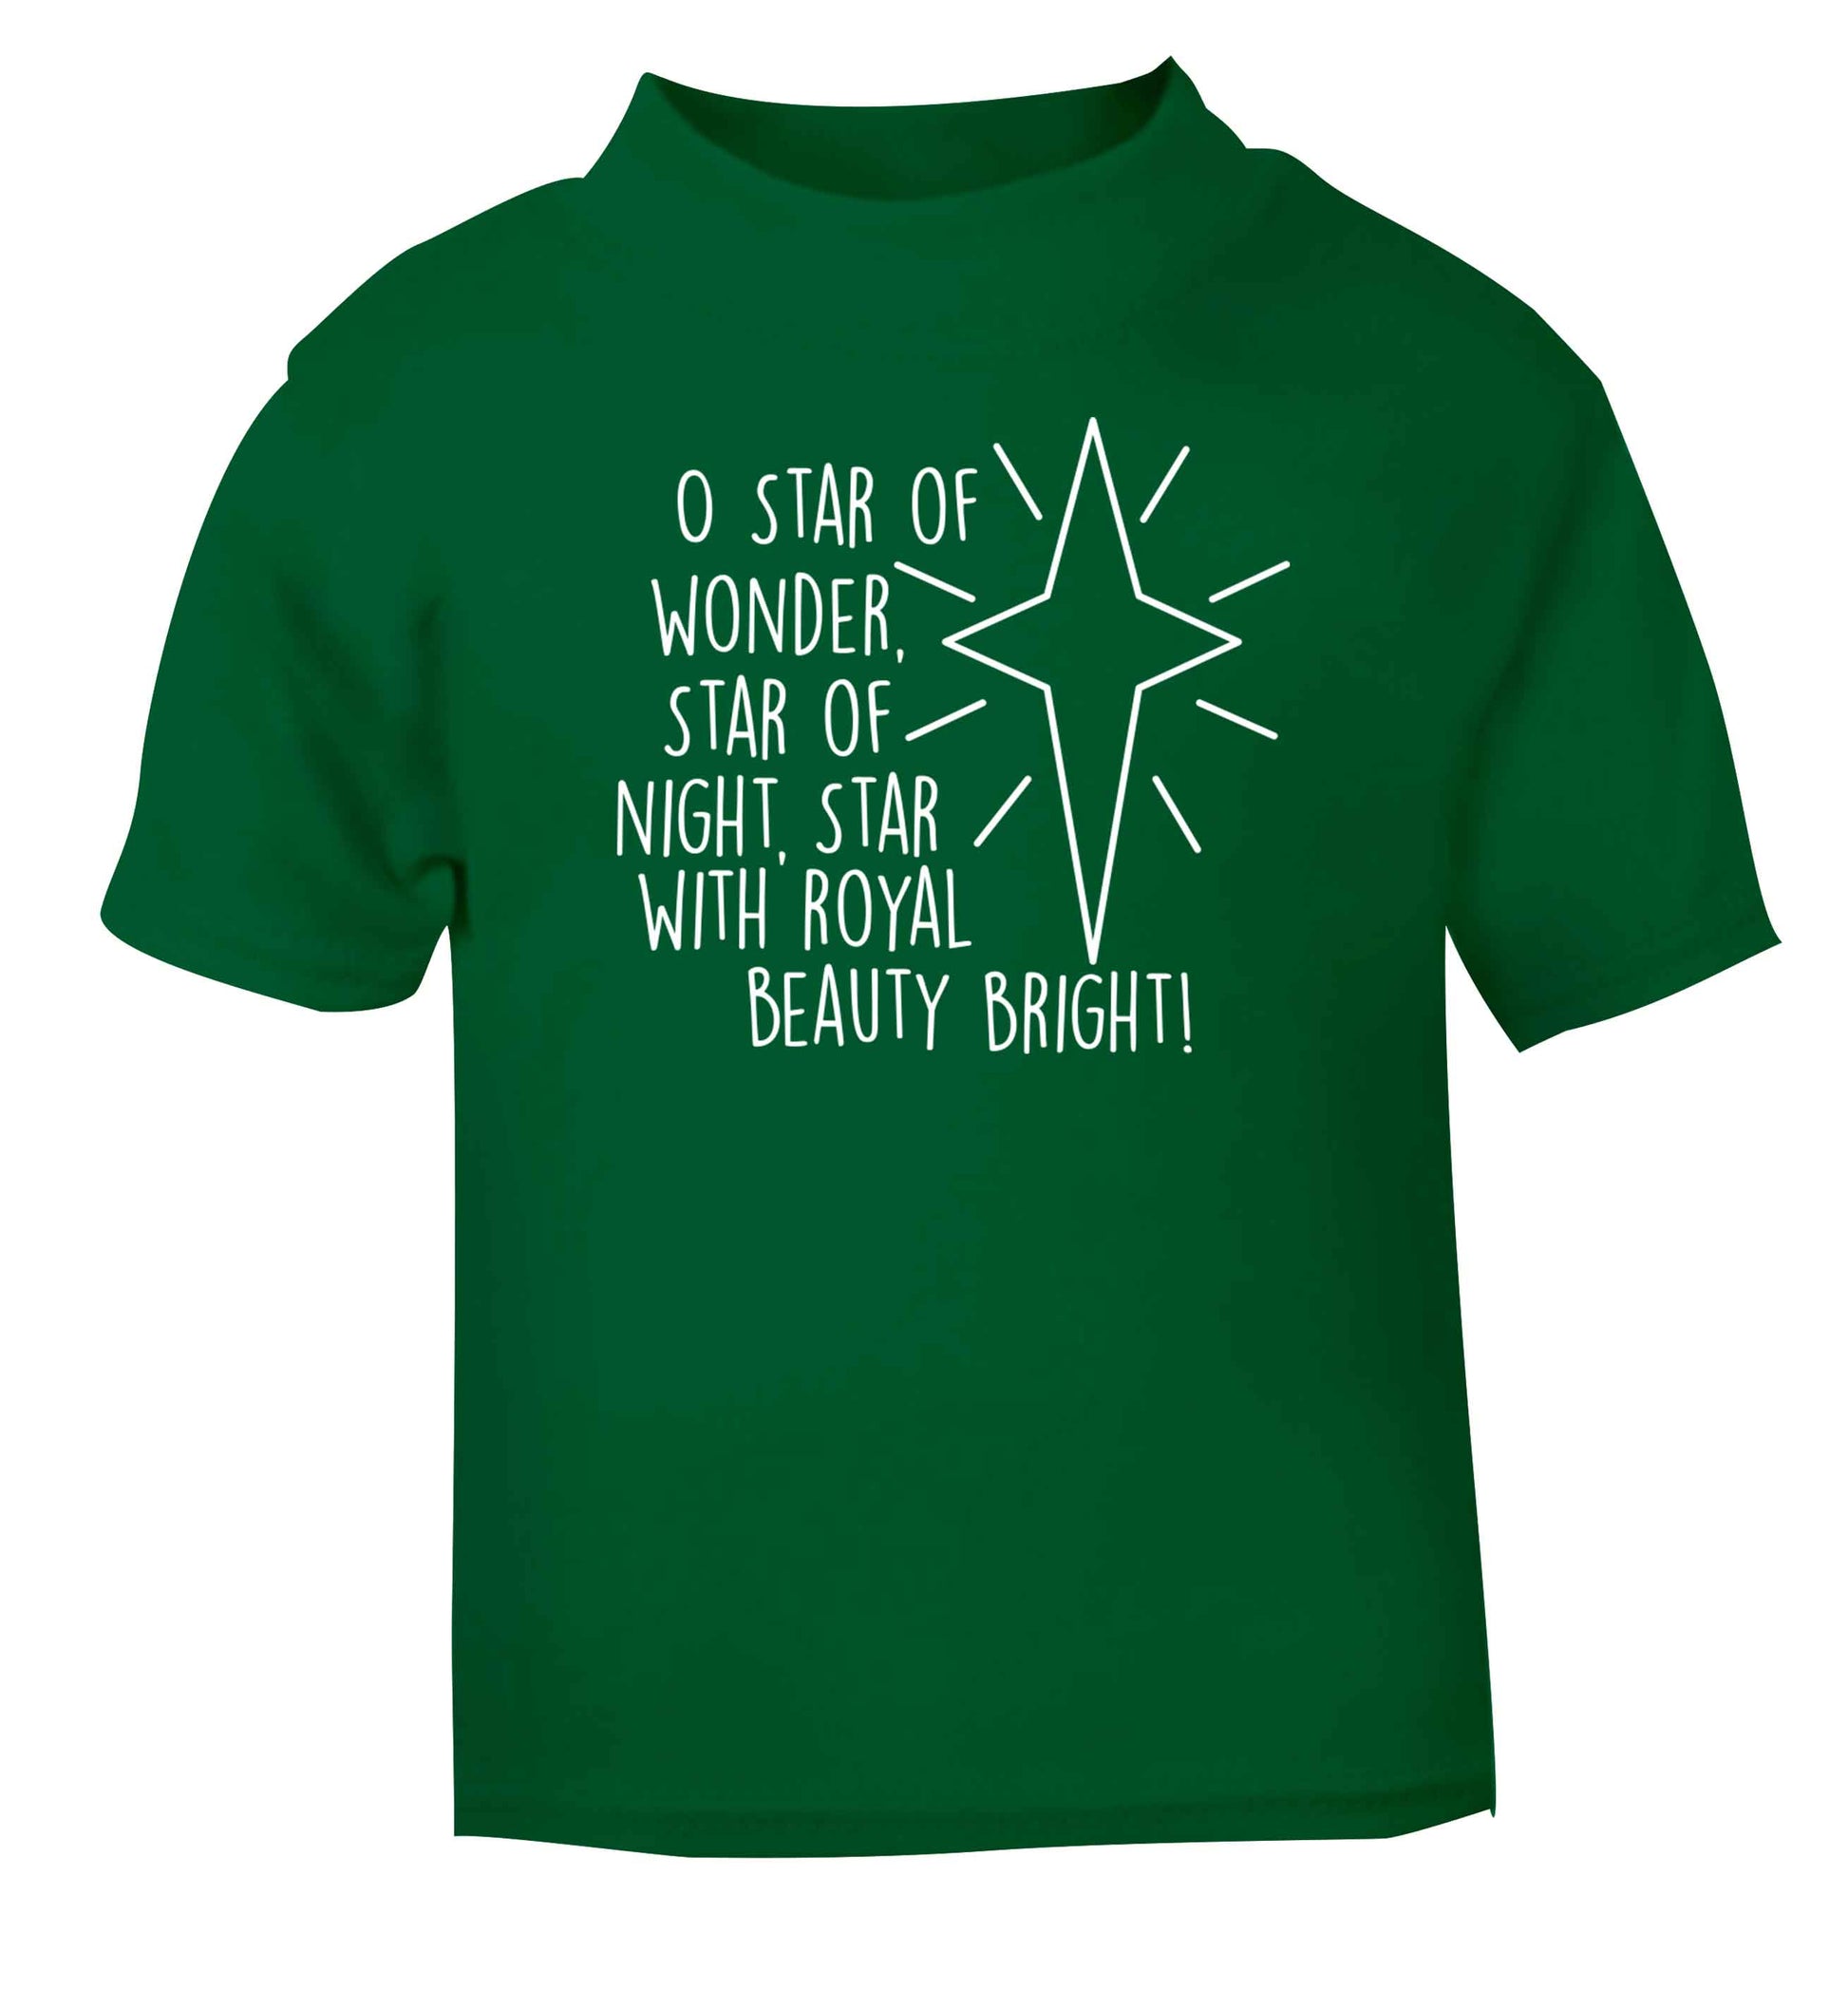 Oh star of wonder star of night, star with royal beauty bright green baby toddler Tshirt 2 Years